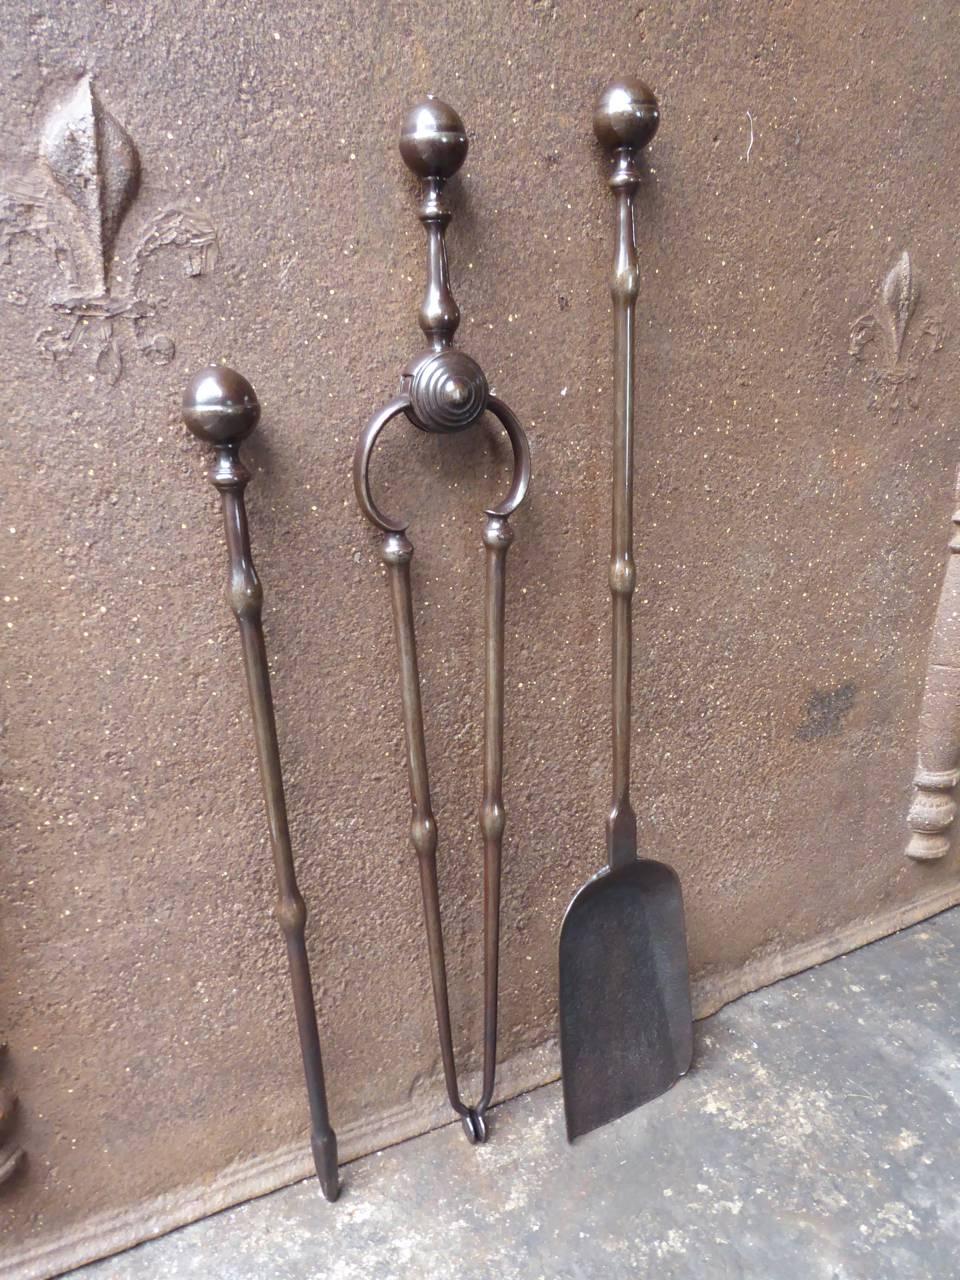 18th-19th century English Georgian fireplace tool set - fire irons made of wrought iron.

We have a unique and specialized collection of antique and used fireplace accessories consisting of more than 1000 listings at 1stdibs. Amongst others we